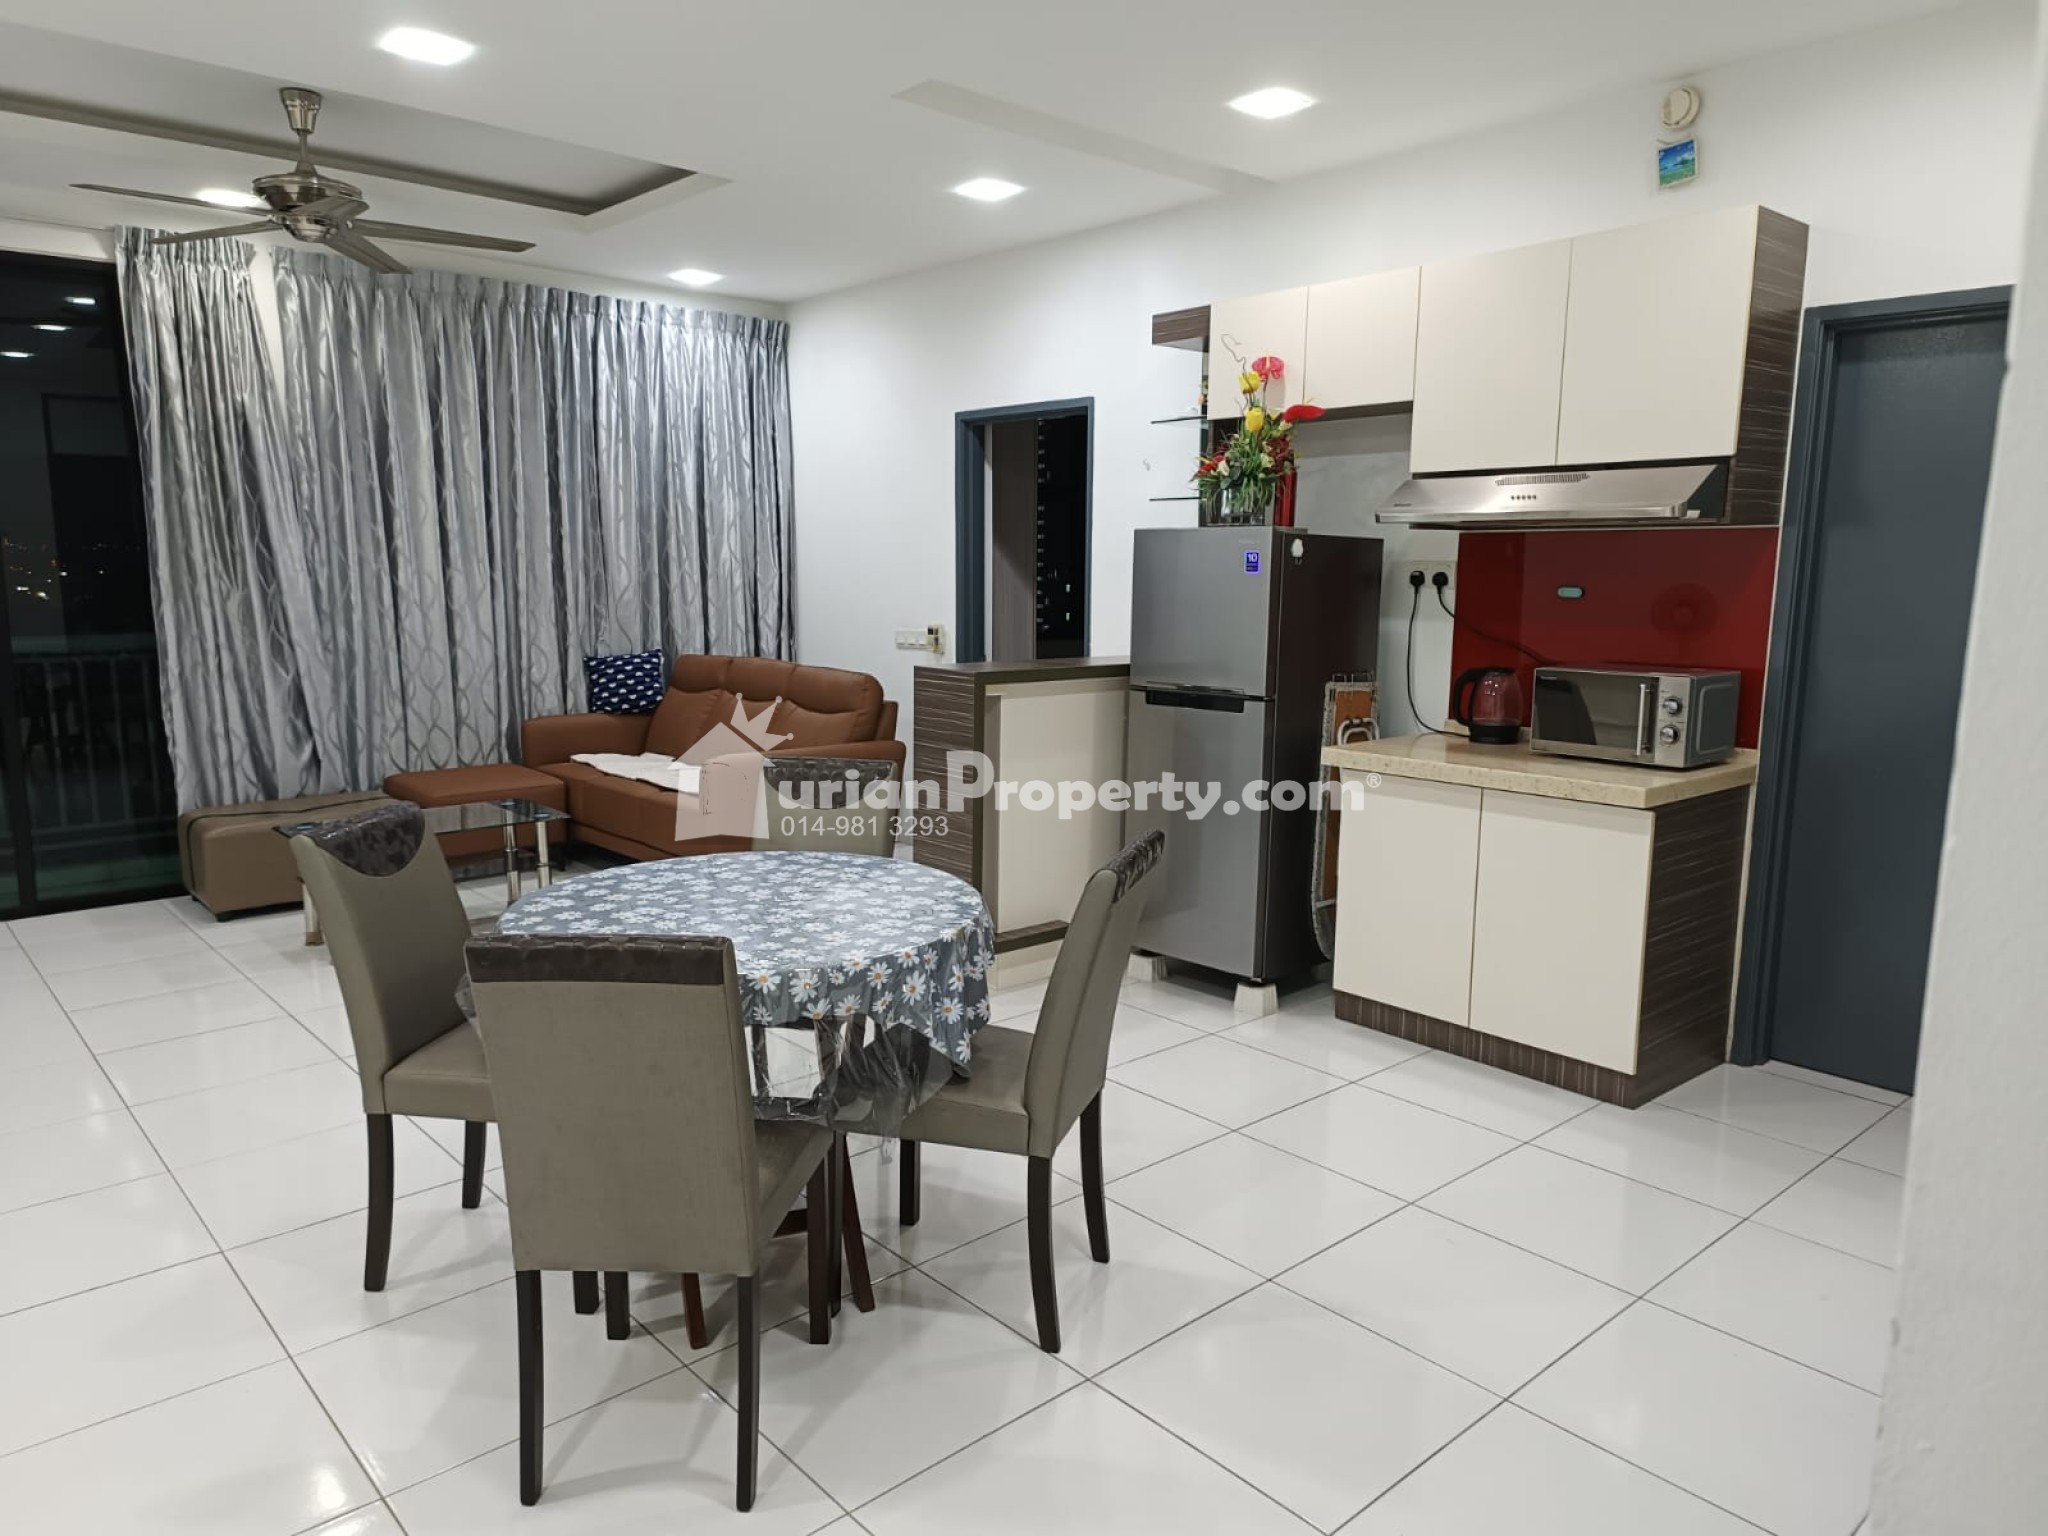 Condo For Rent at The Sky Executive Suites